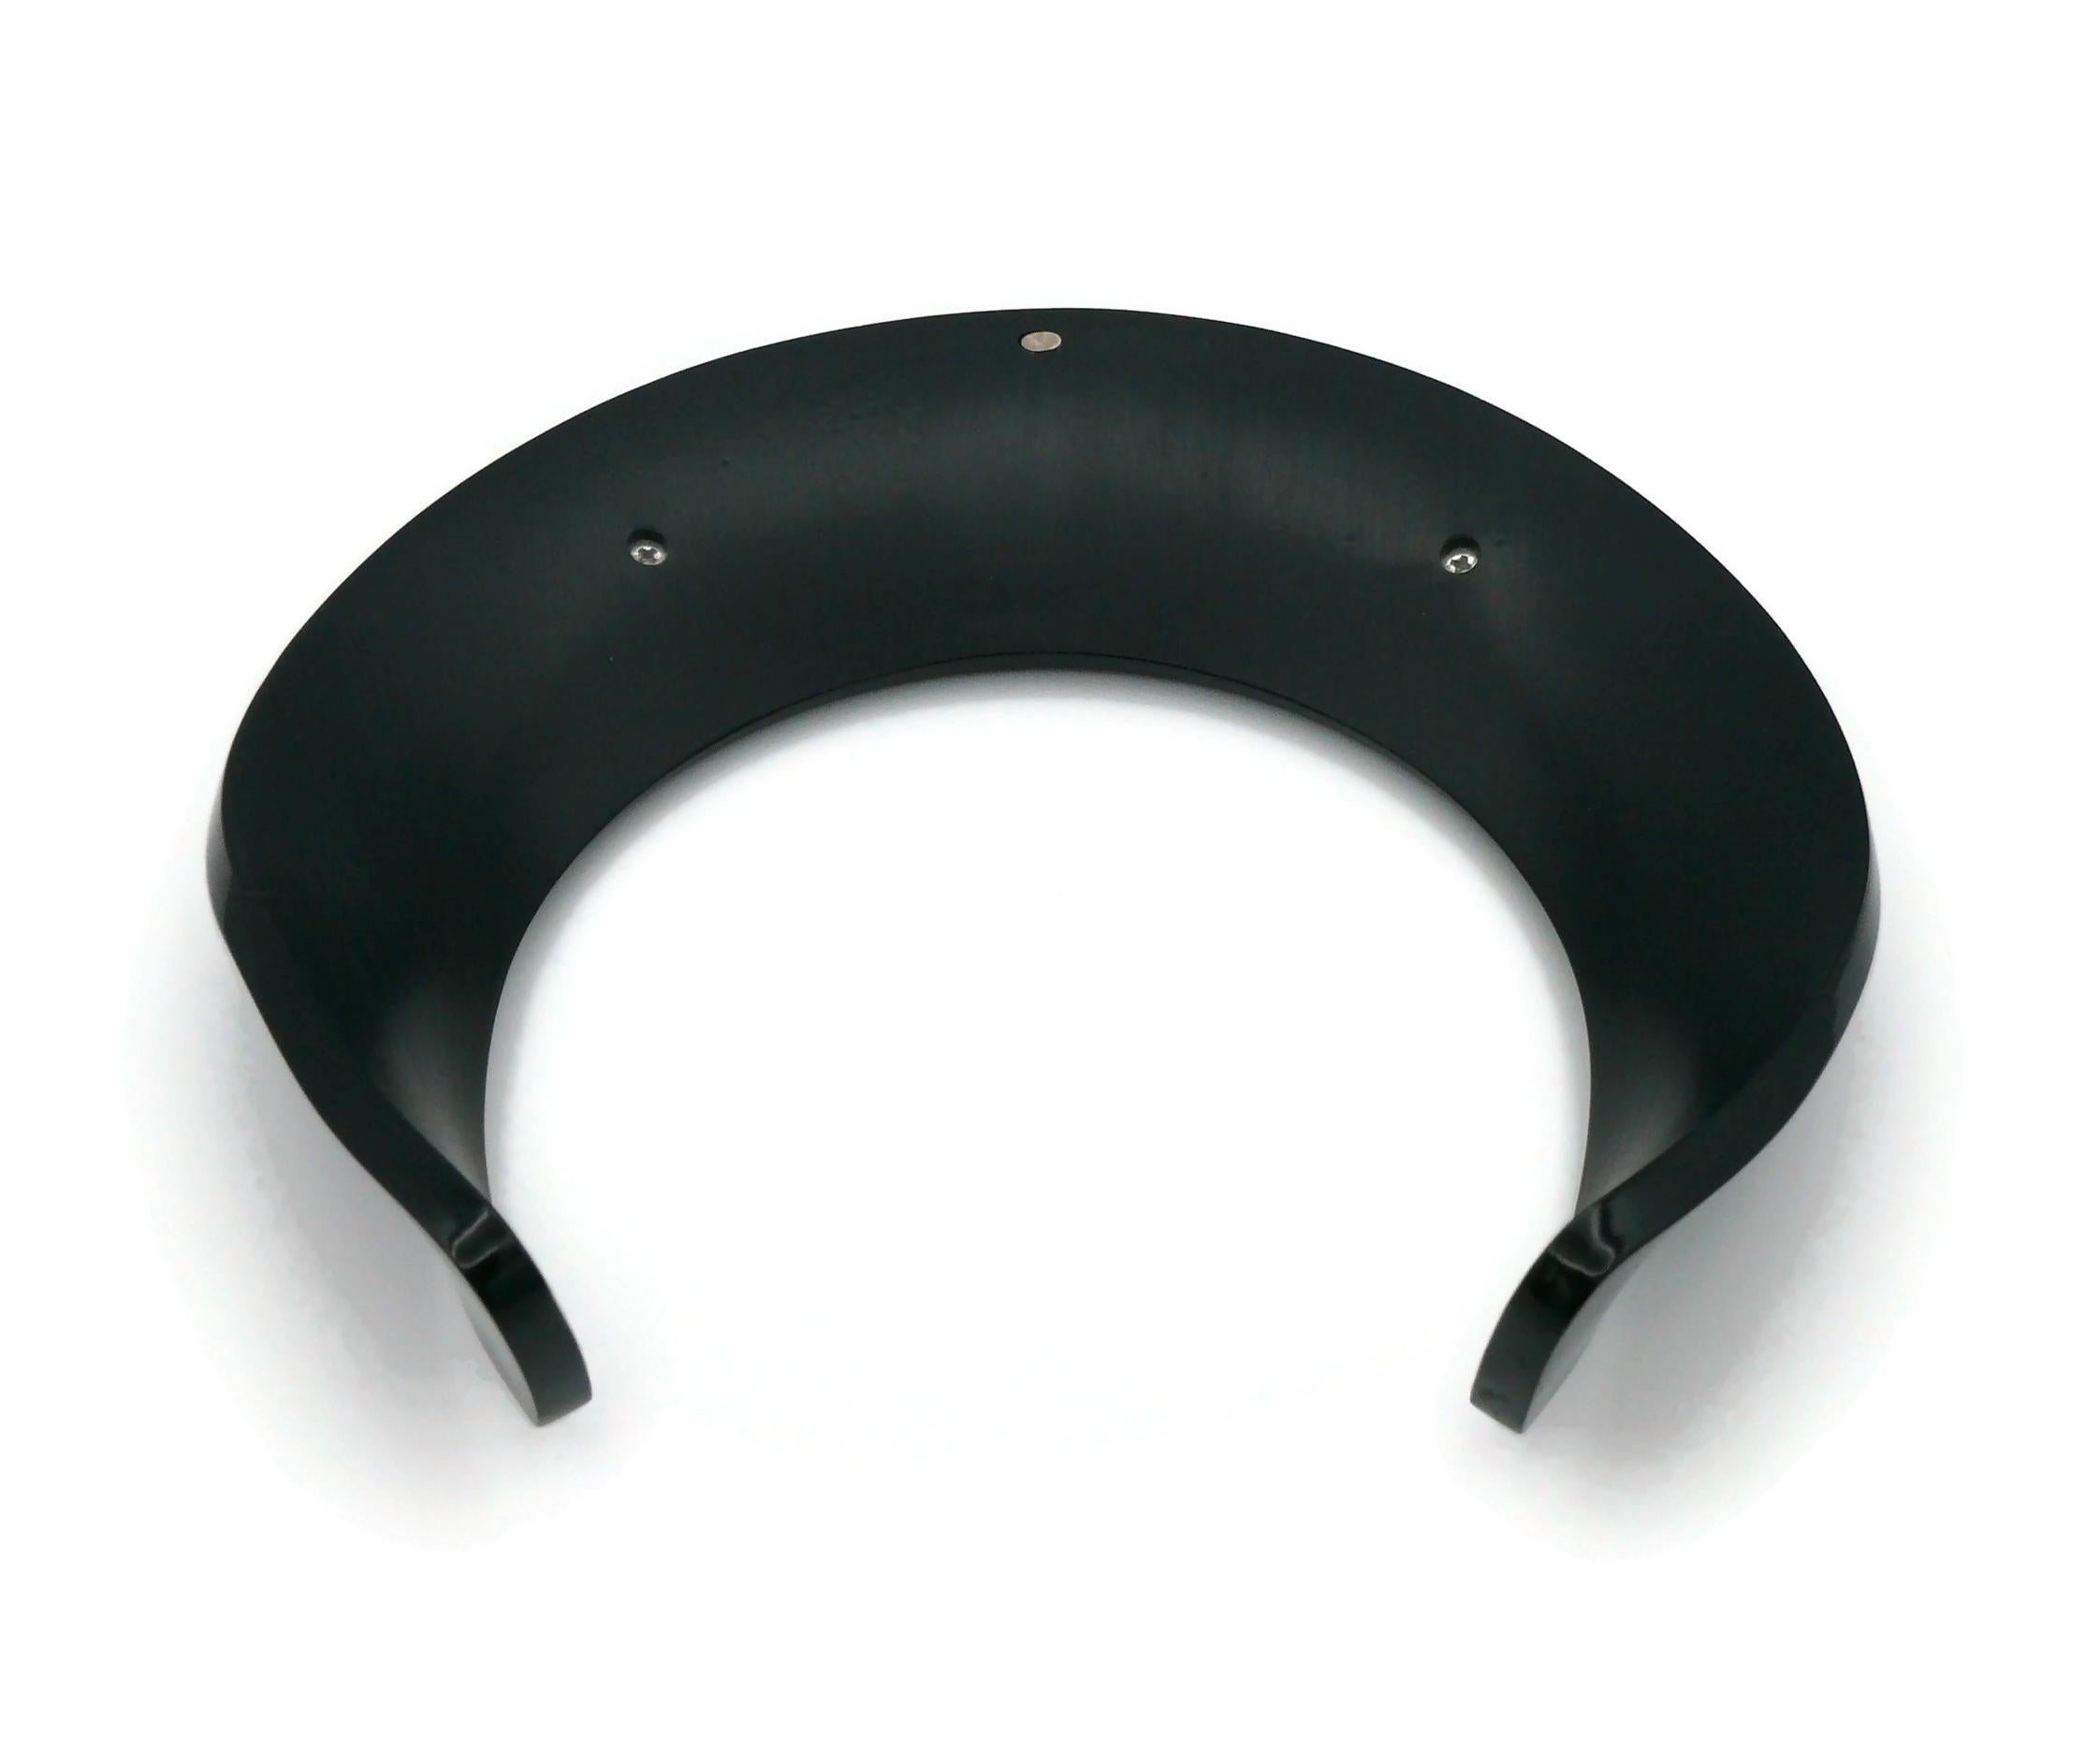 CHANEL by KARL LAGERFELD Black and White Resin Choker Necklace, Fall 2007 For Sale 4